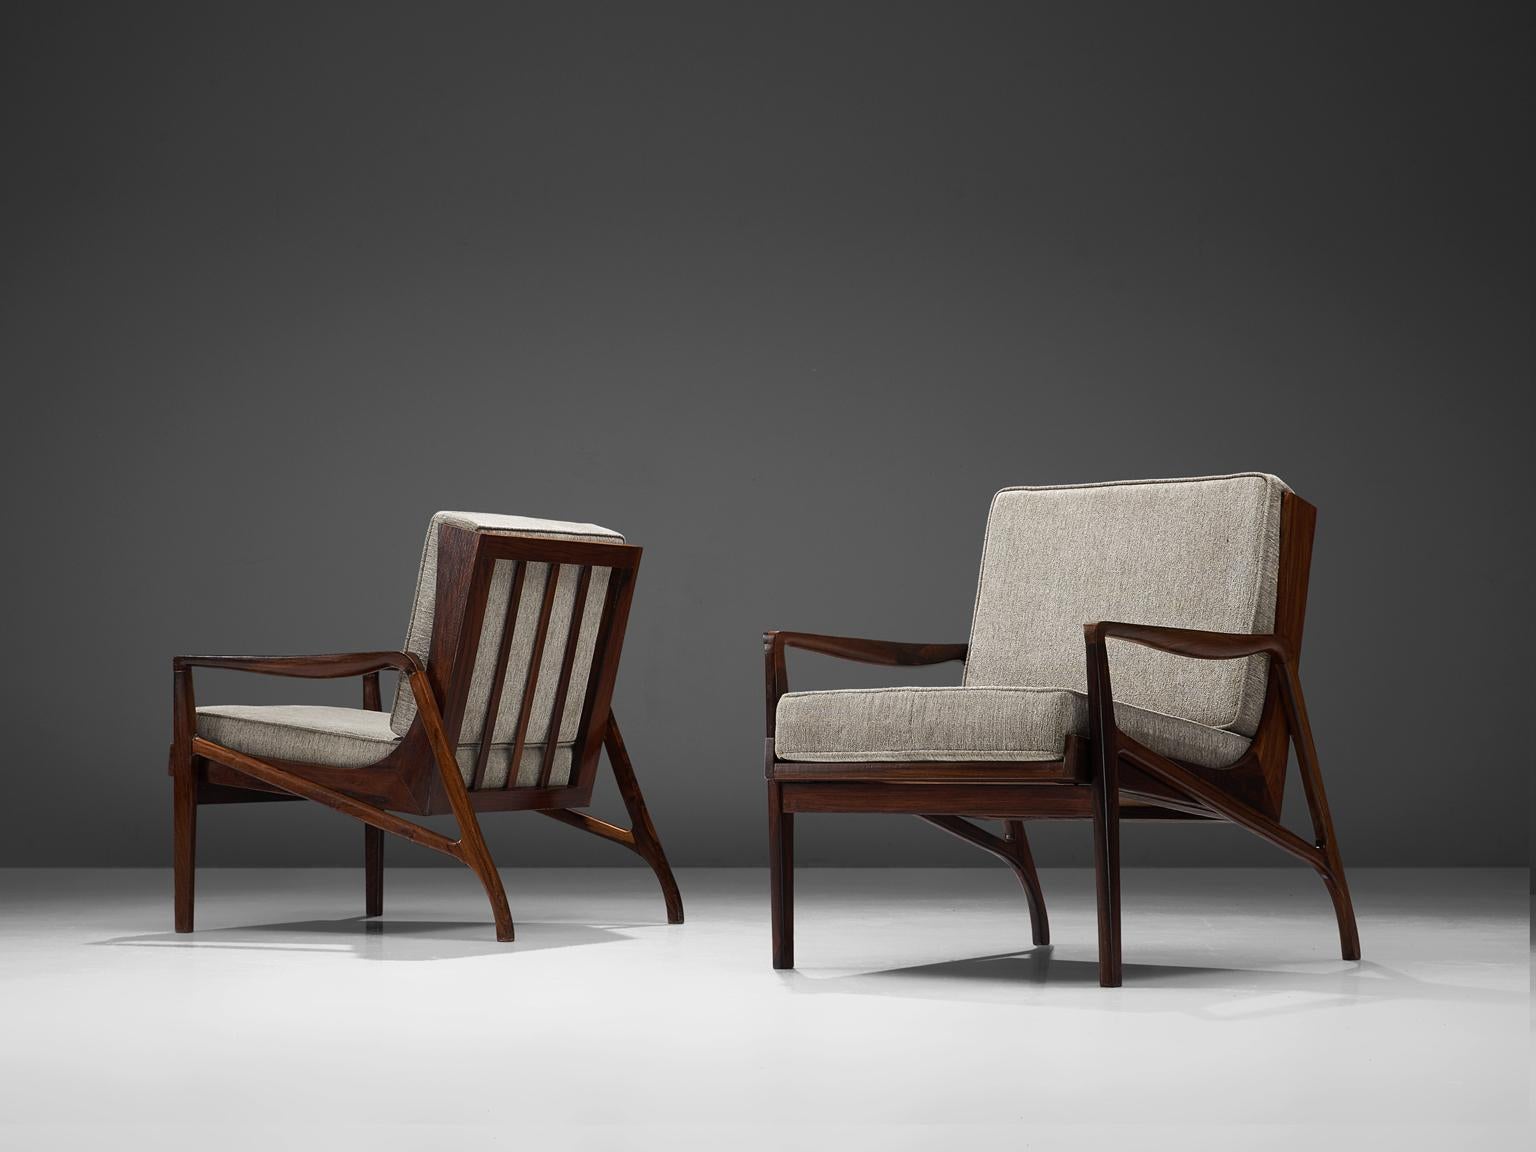 Liceu de Artes e Oficios, lounge chairs in grey fabric and rosewood, Sao Paulo, Brazil, 1960s.

These sculptural Brazilian lounge chairs are made of solid dark stained wooden construction and feature a slatted back. The frame is delicate and